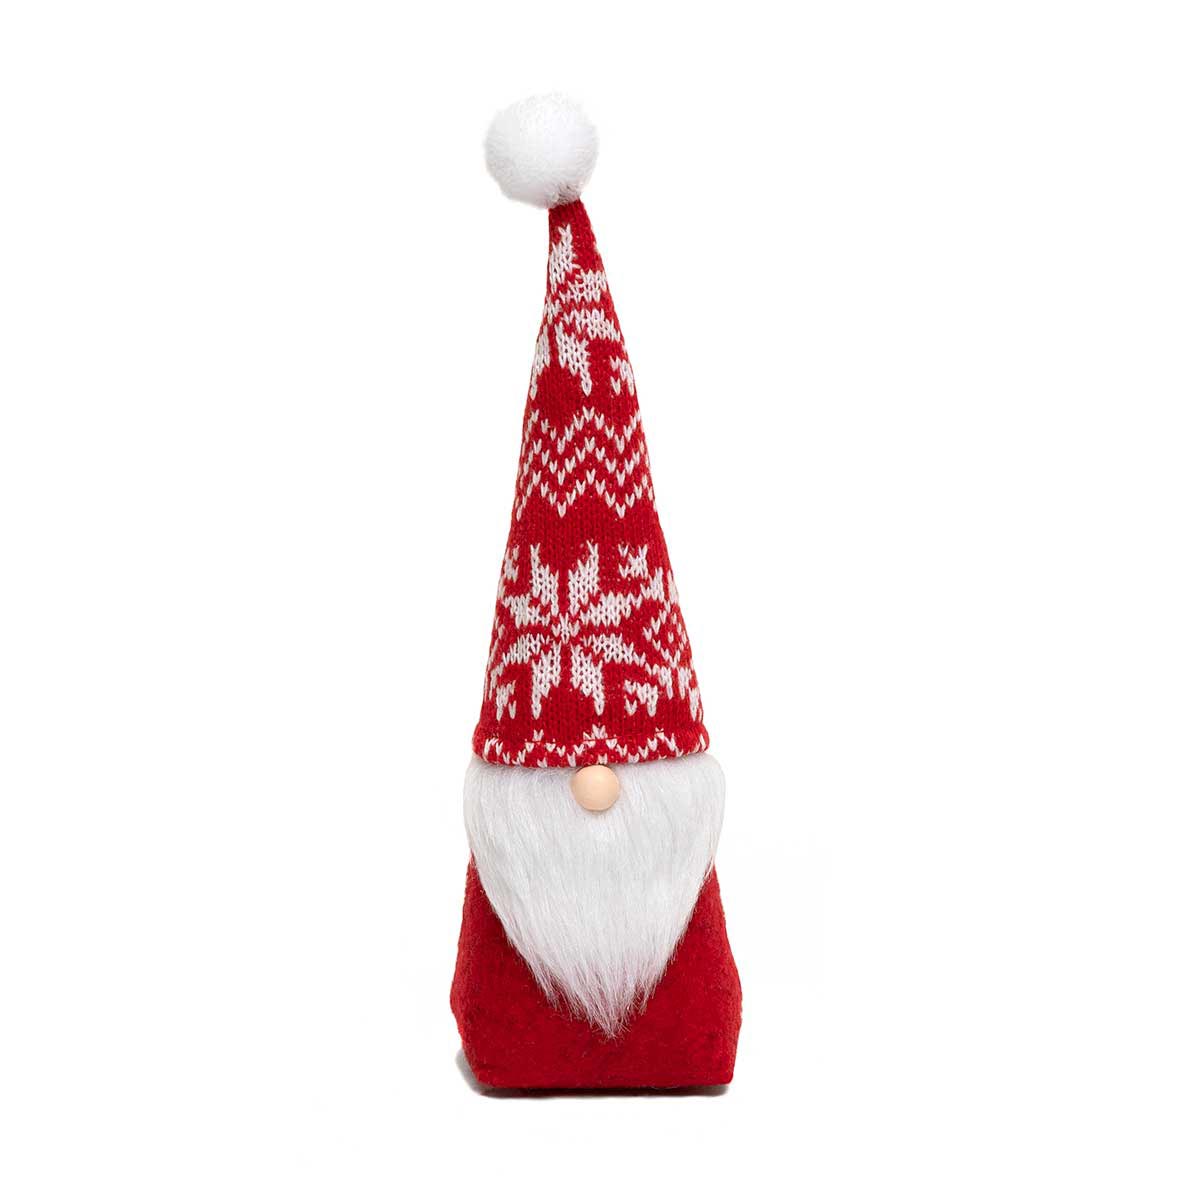 !TOMTE HOLIDAY GNOME WITH SWEATER HAT MEDIUM